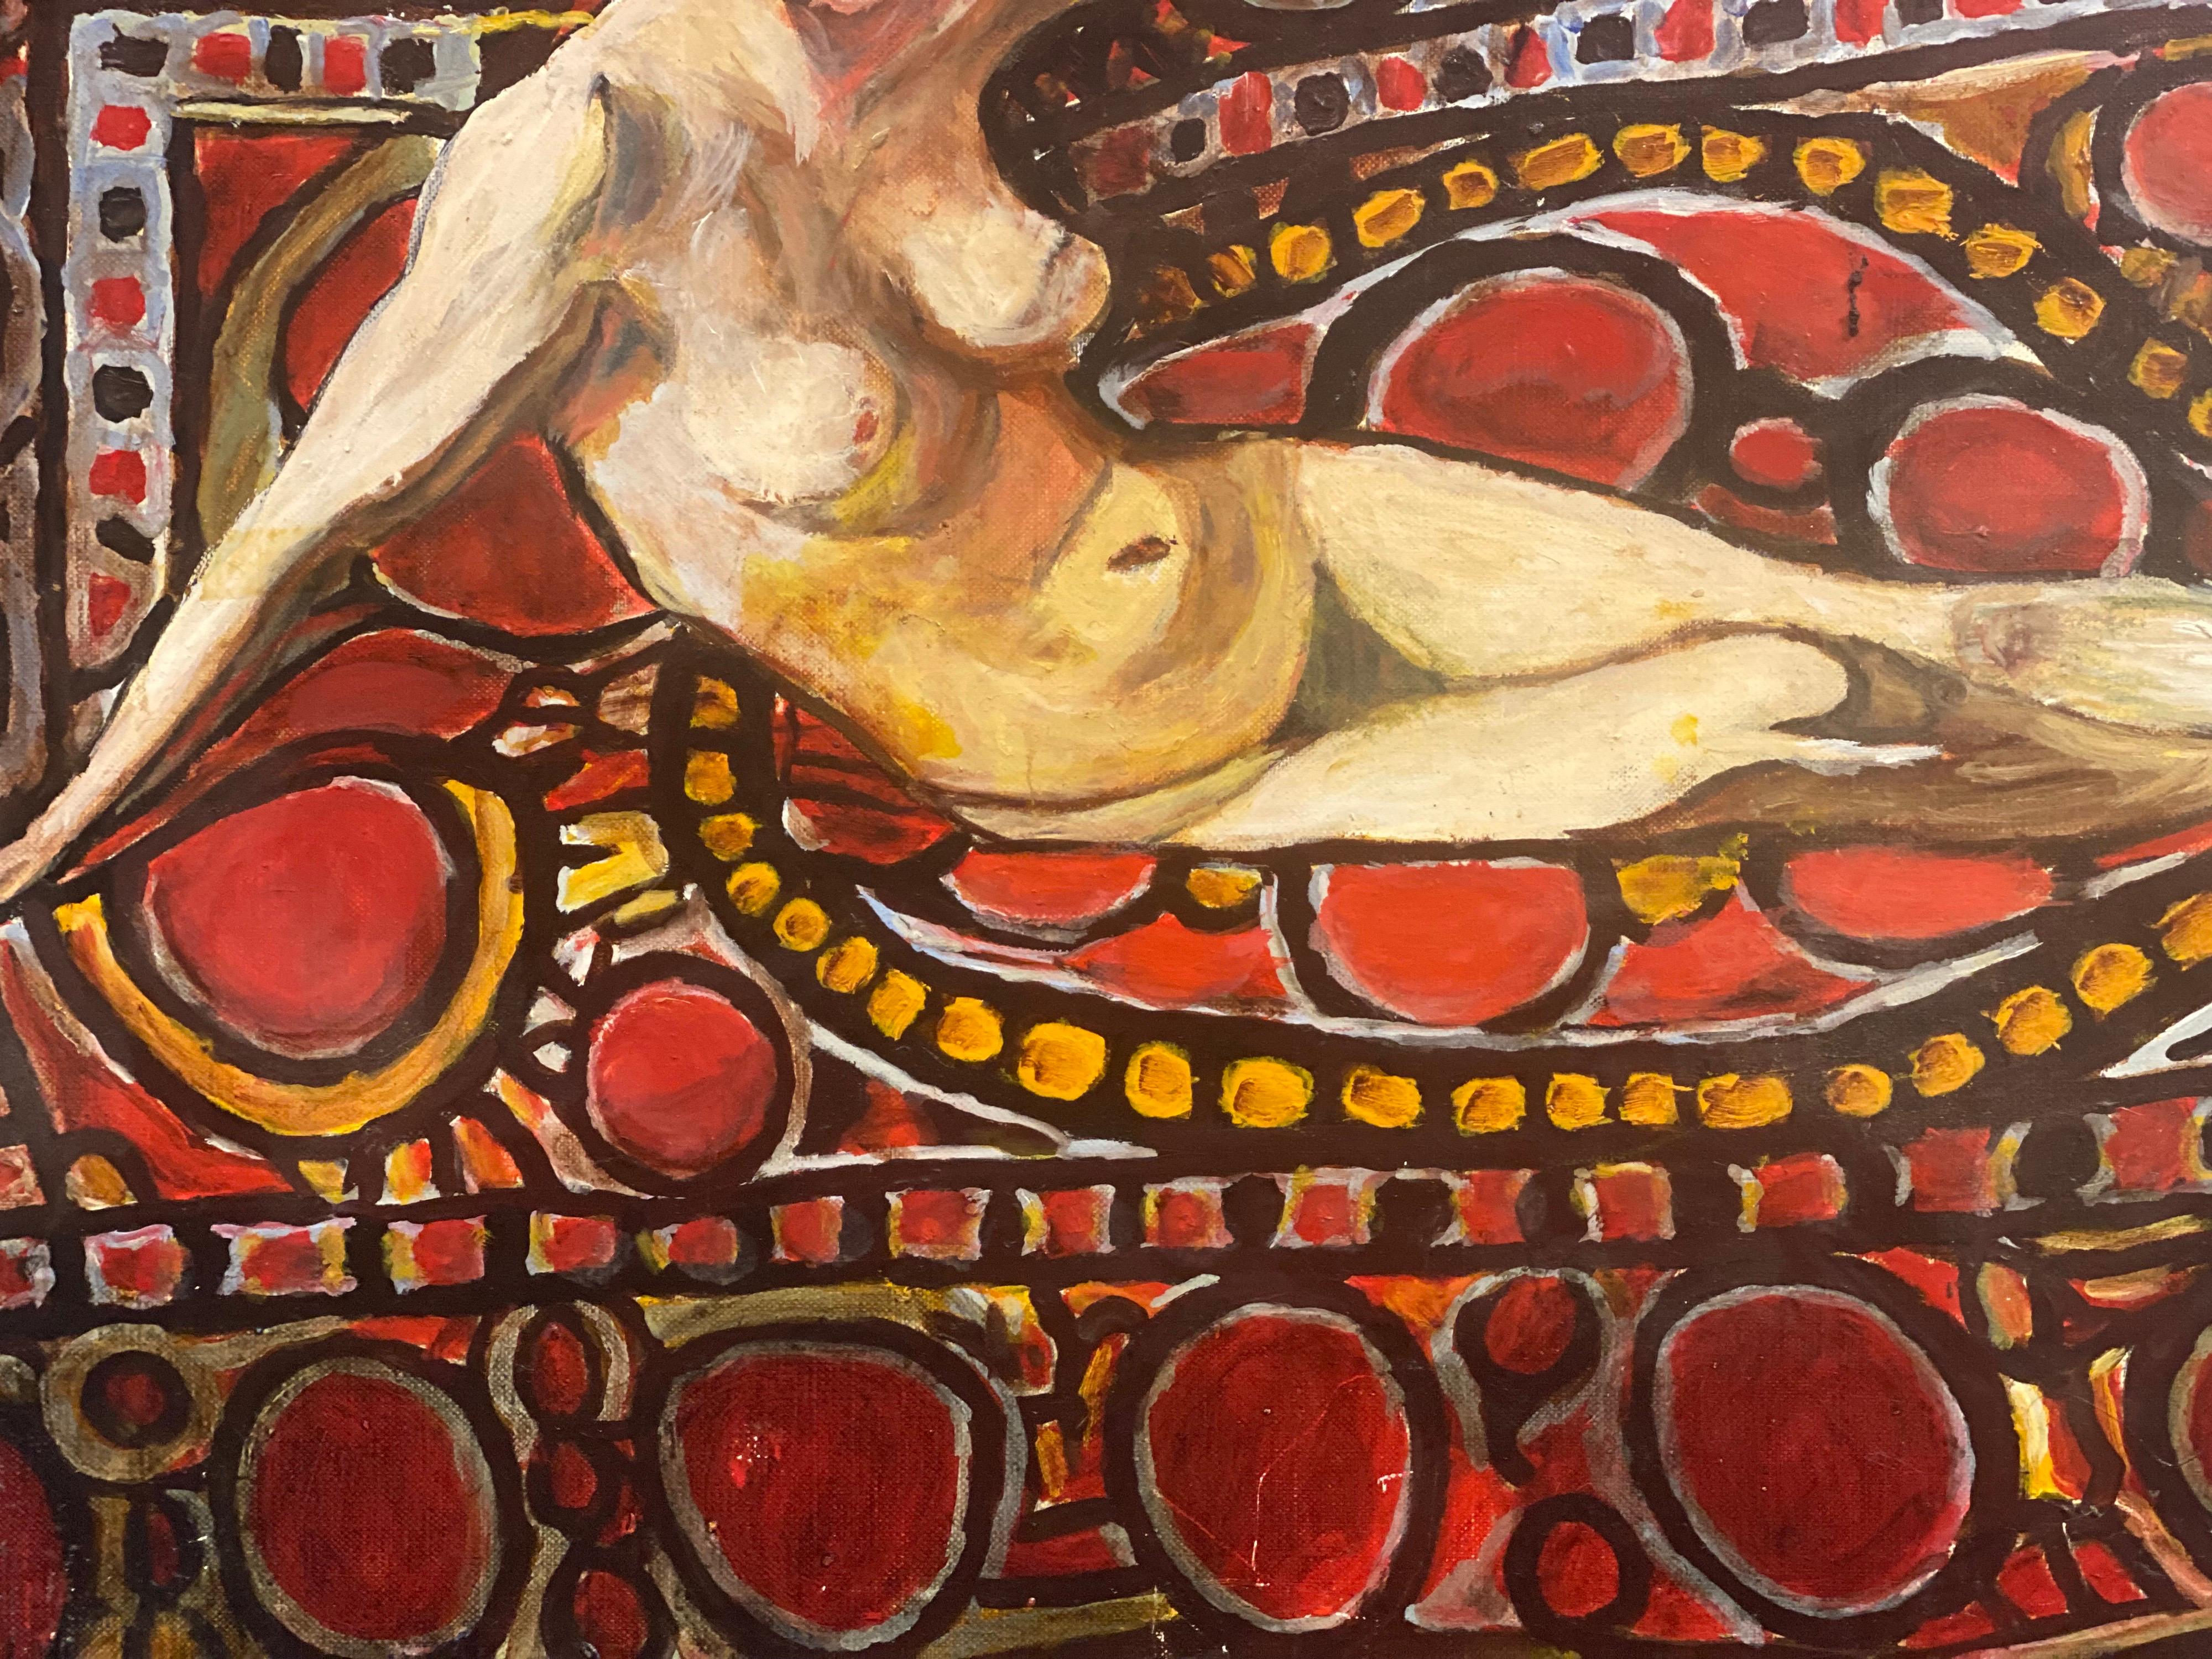 Large French Colorist Modernist Oil Reclining Nude on Red Sofa. 1970's Oil - Orange Nude Painting by Unknown